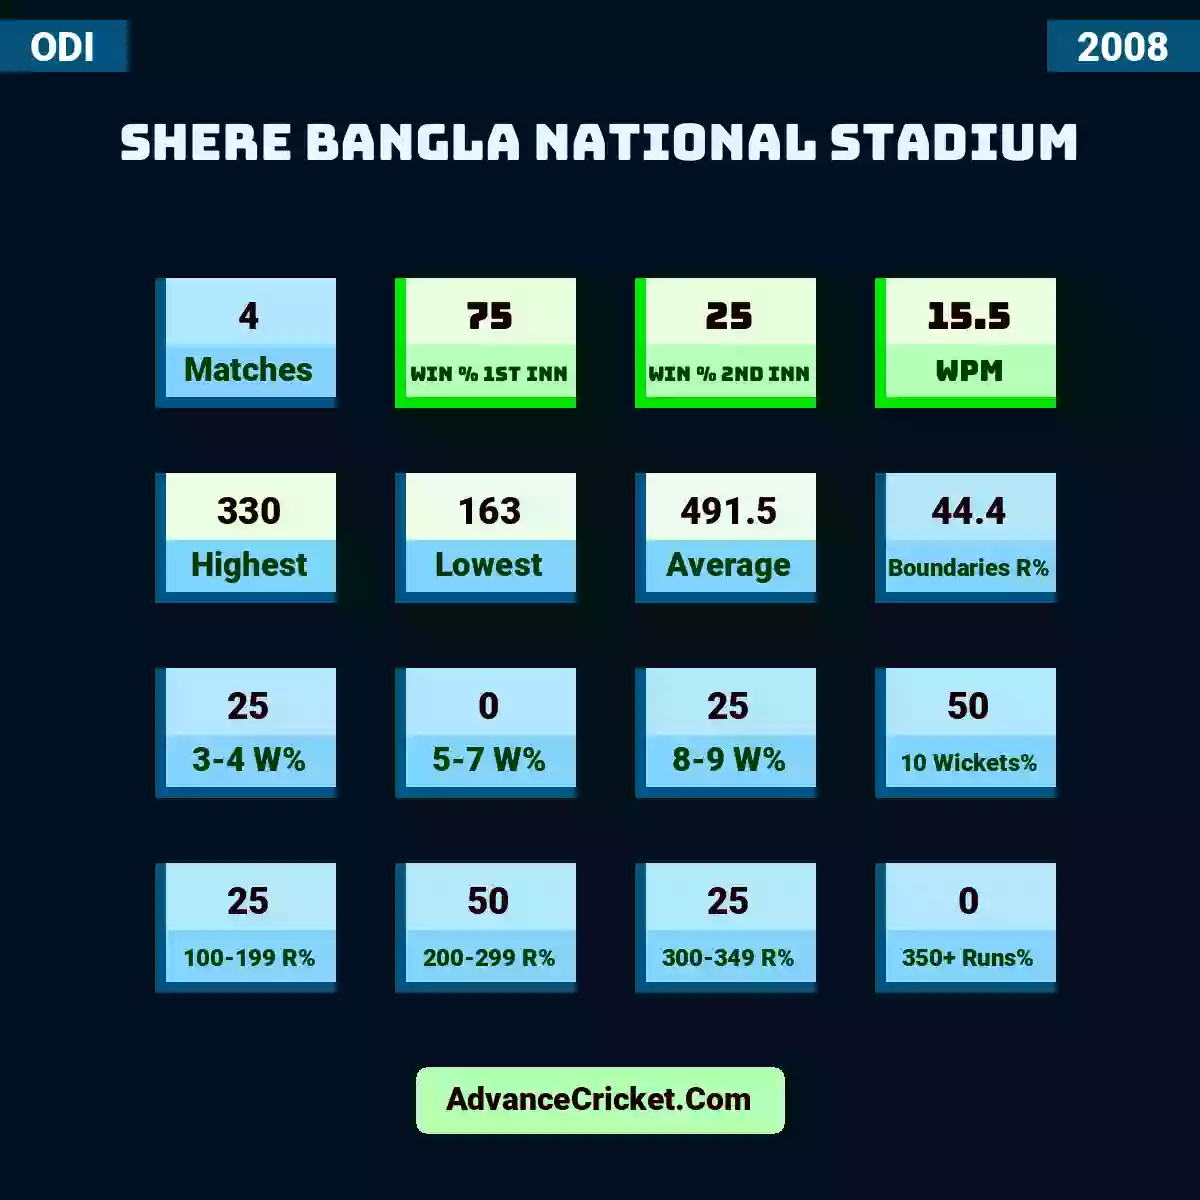 Image showing Shere Bangla National Stadium with Matches: 4, Win % 1st Inn: 75, Win % 2nd Inn: 25, WPM: 15.5, Highest: 330, Lowest: 163, Average: 491.5, Boundaries R%: 44.4, 3-4 W%: 25, 5-7 W%: 0, 8-9 W%: 25, 10 Wickets%: 50, 100-199 R%: 25, 200-299 R%: 50, 300-349 R%: 25, 350+ Runs%: 0.